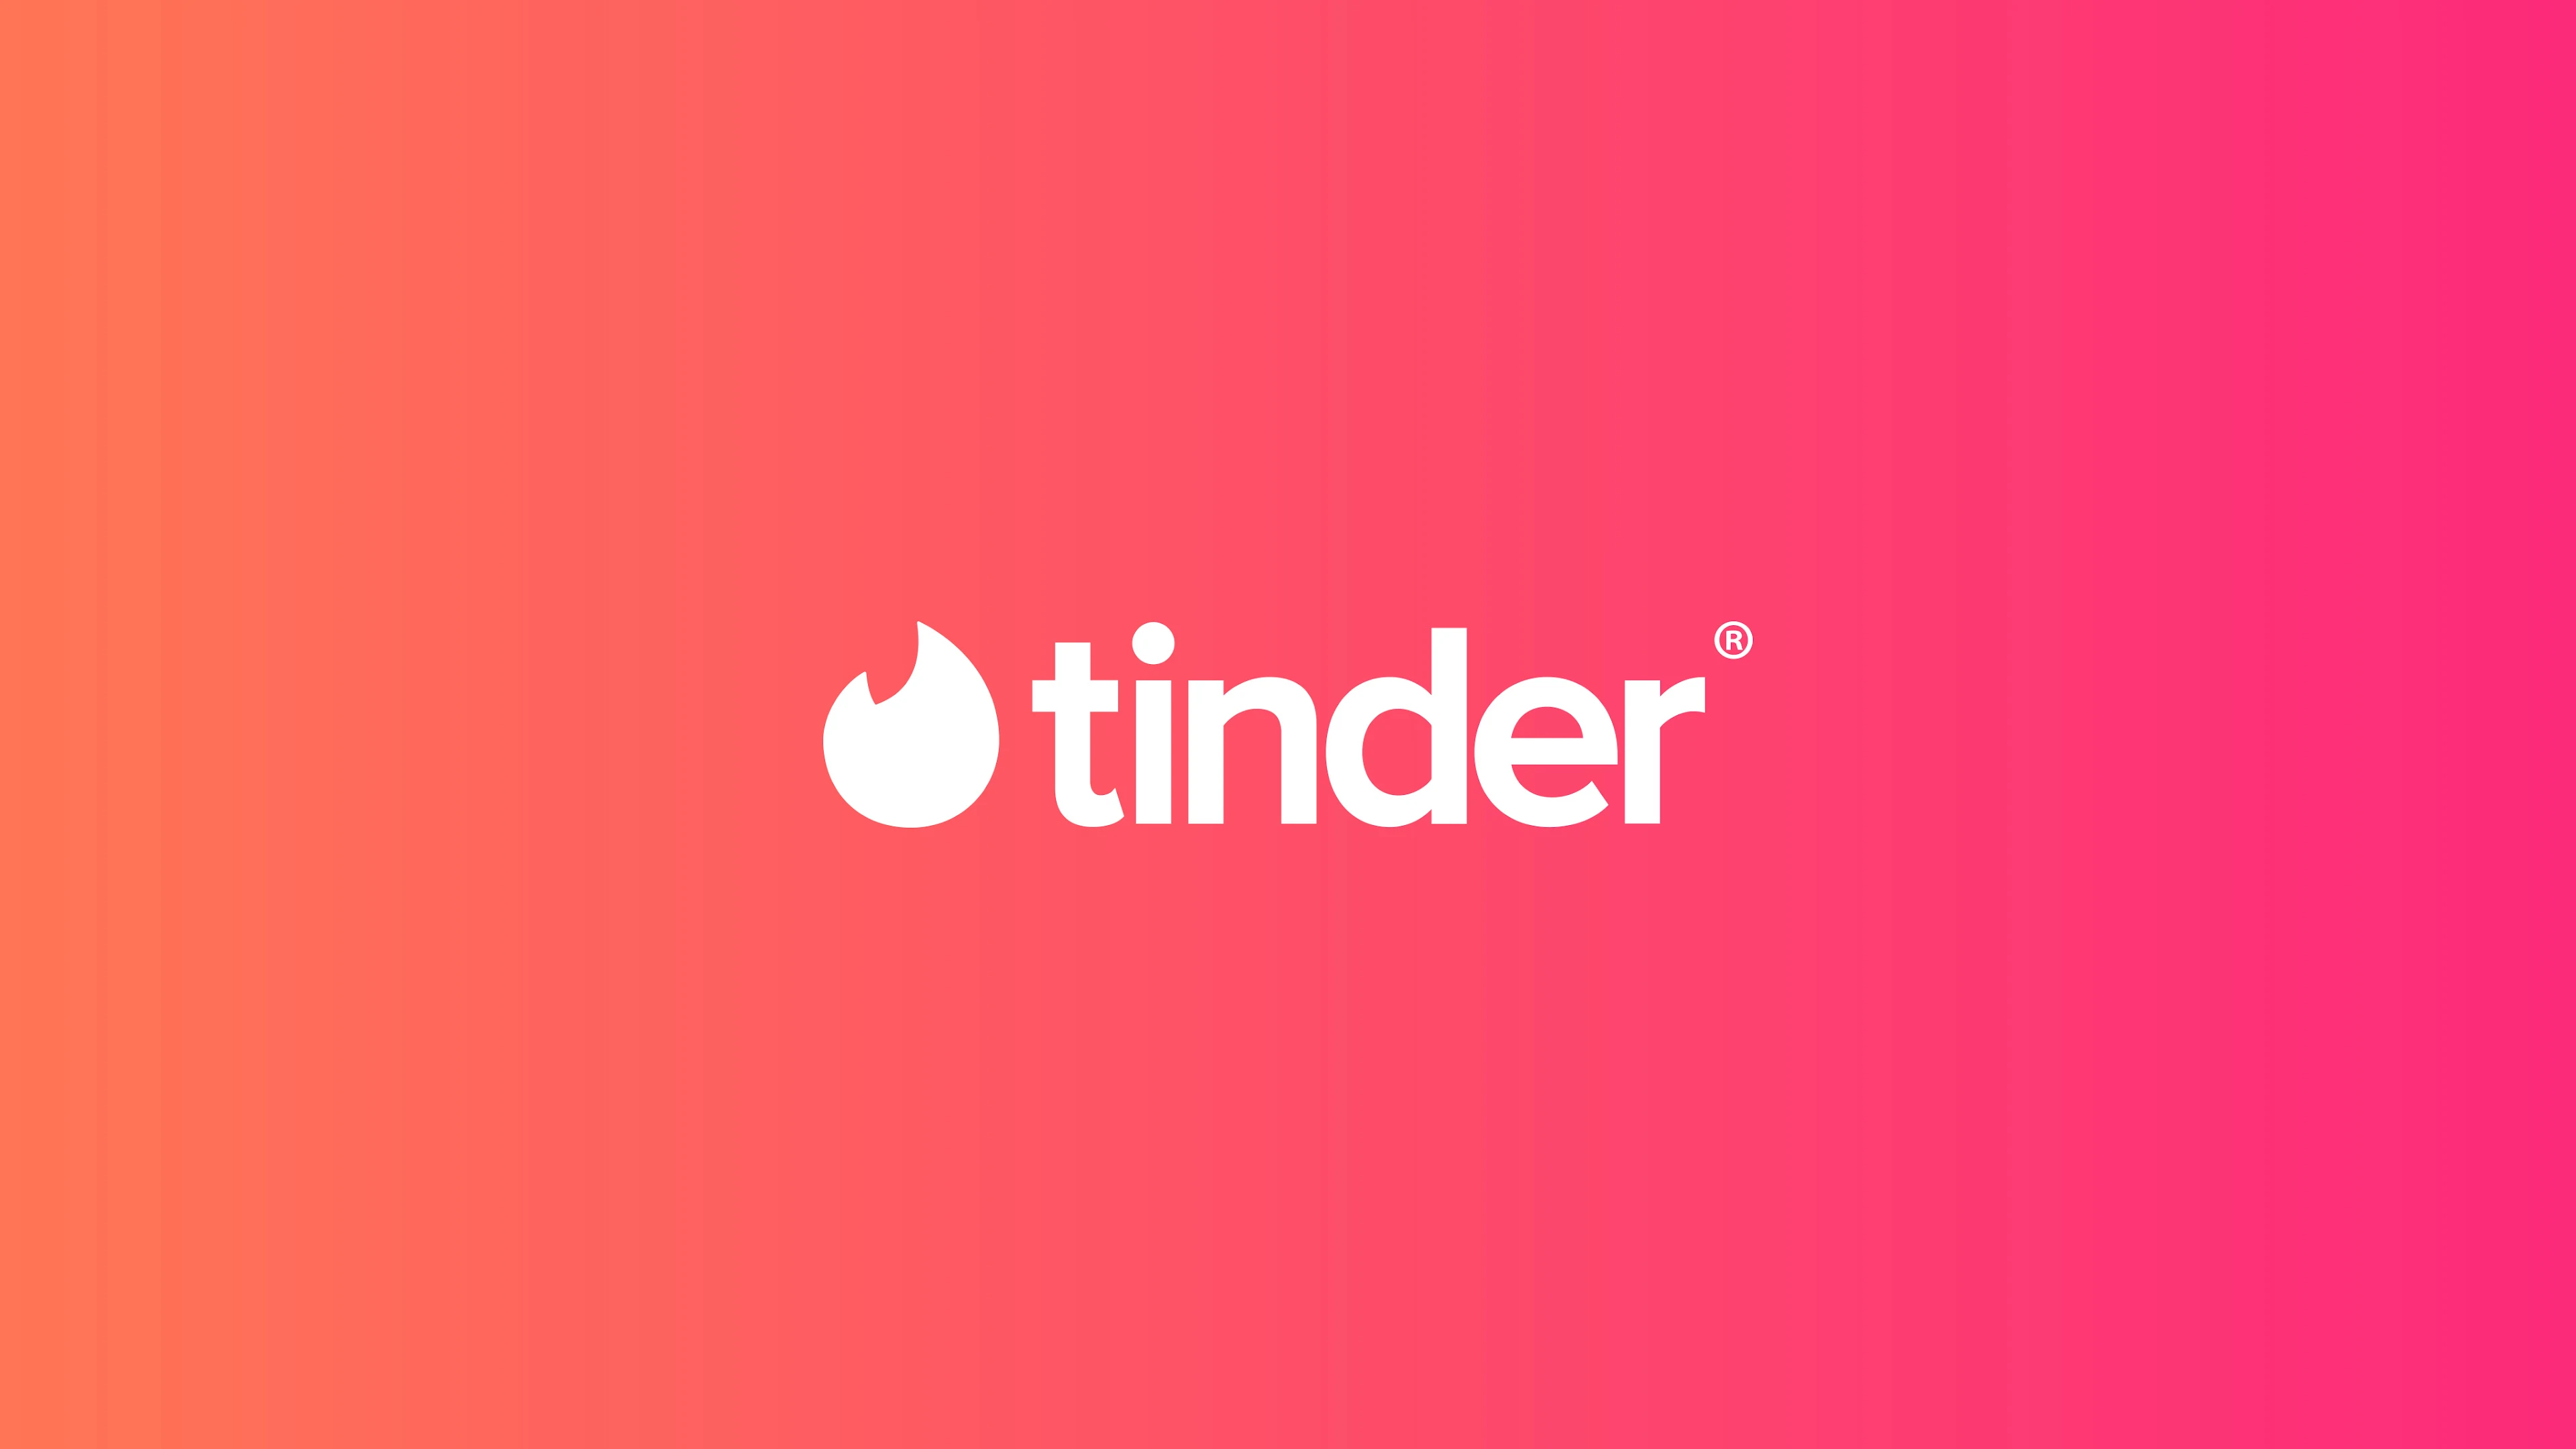 Tinder Gold Personal Upgrades (Giftcards) (Works for all countries)